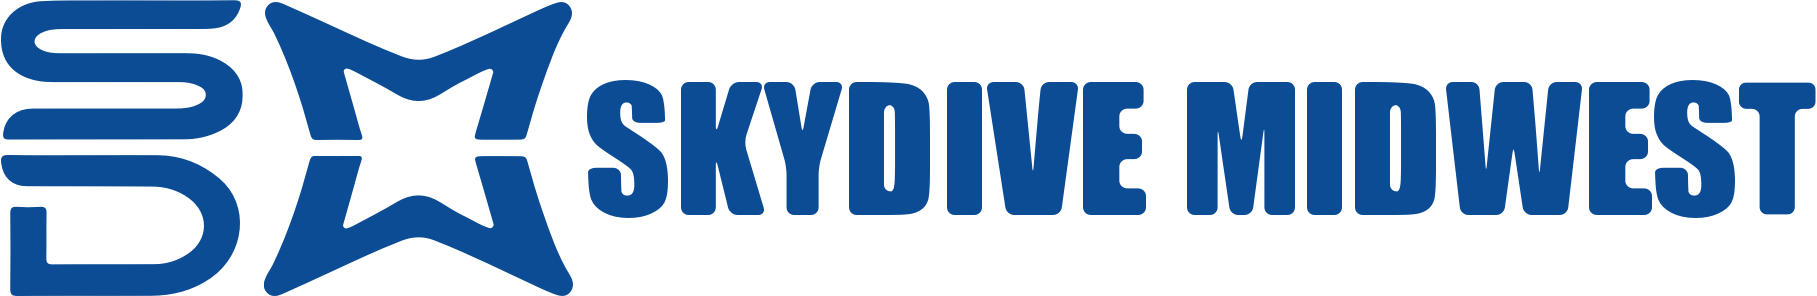 Skydive Midwest logo